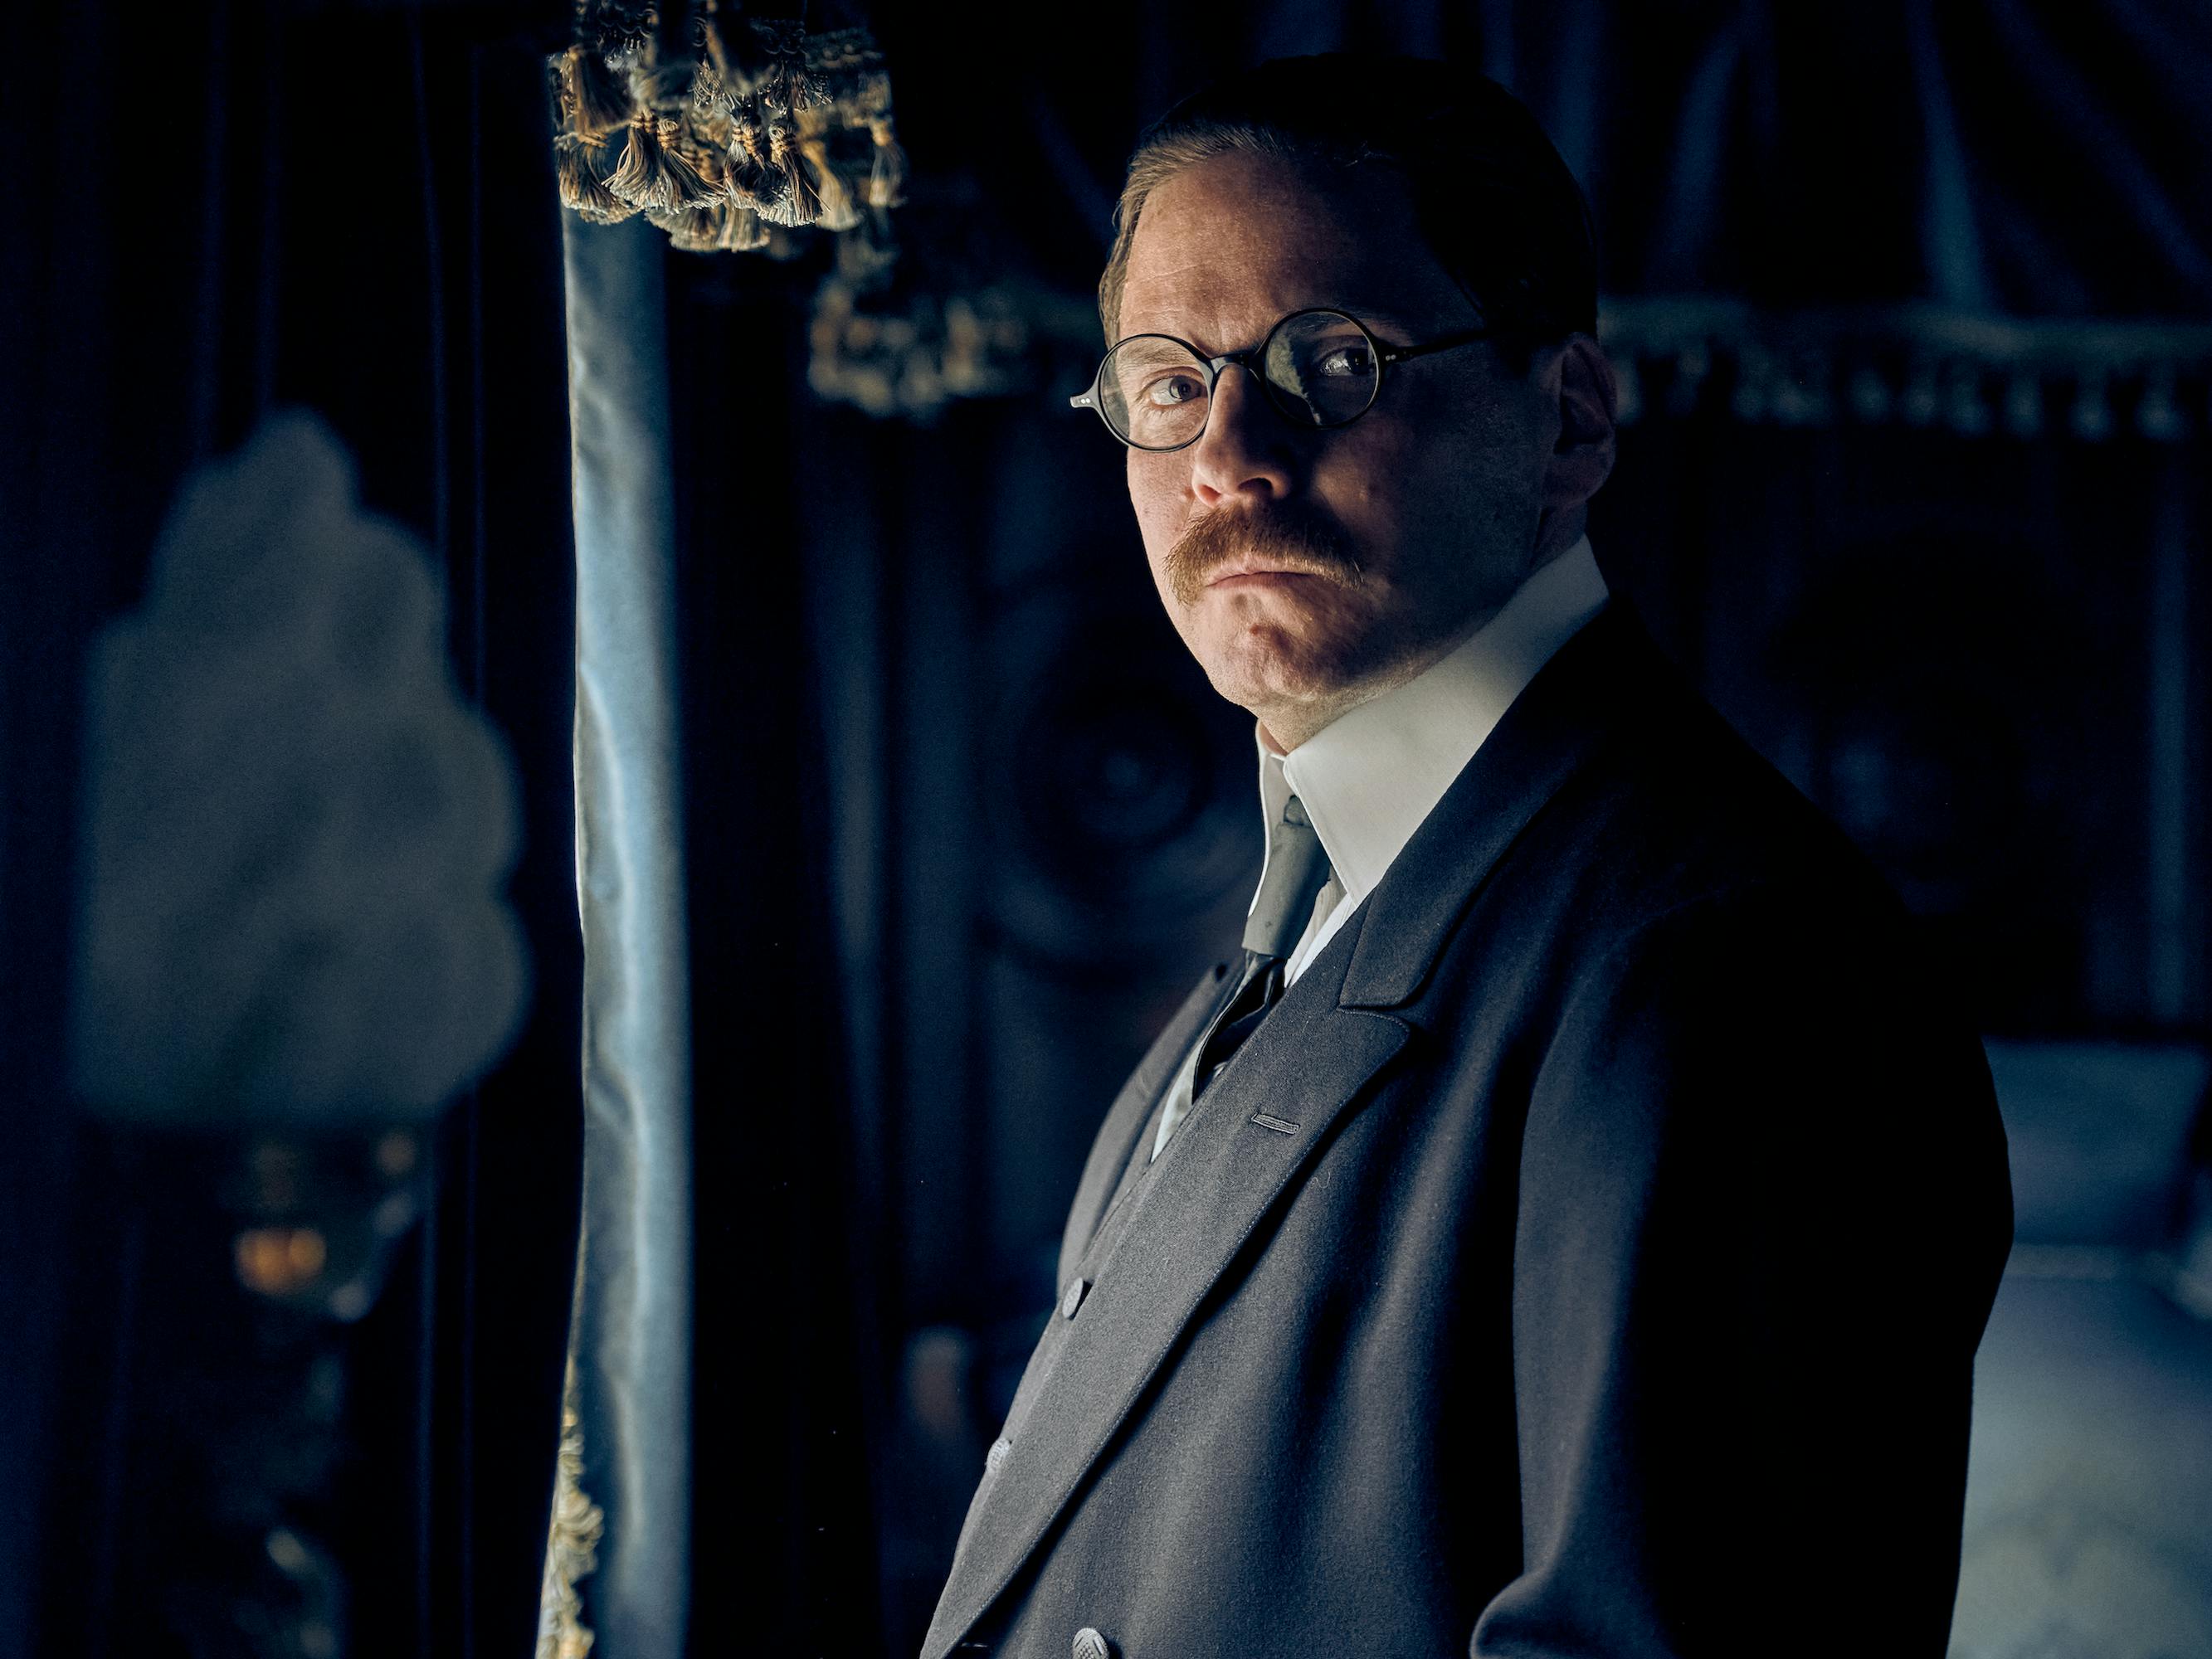 Matthias Erzberger (Daniel Brühl) wears a dark suit and glasses and has an impressive mustache in this dark picture.